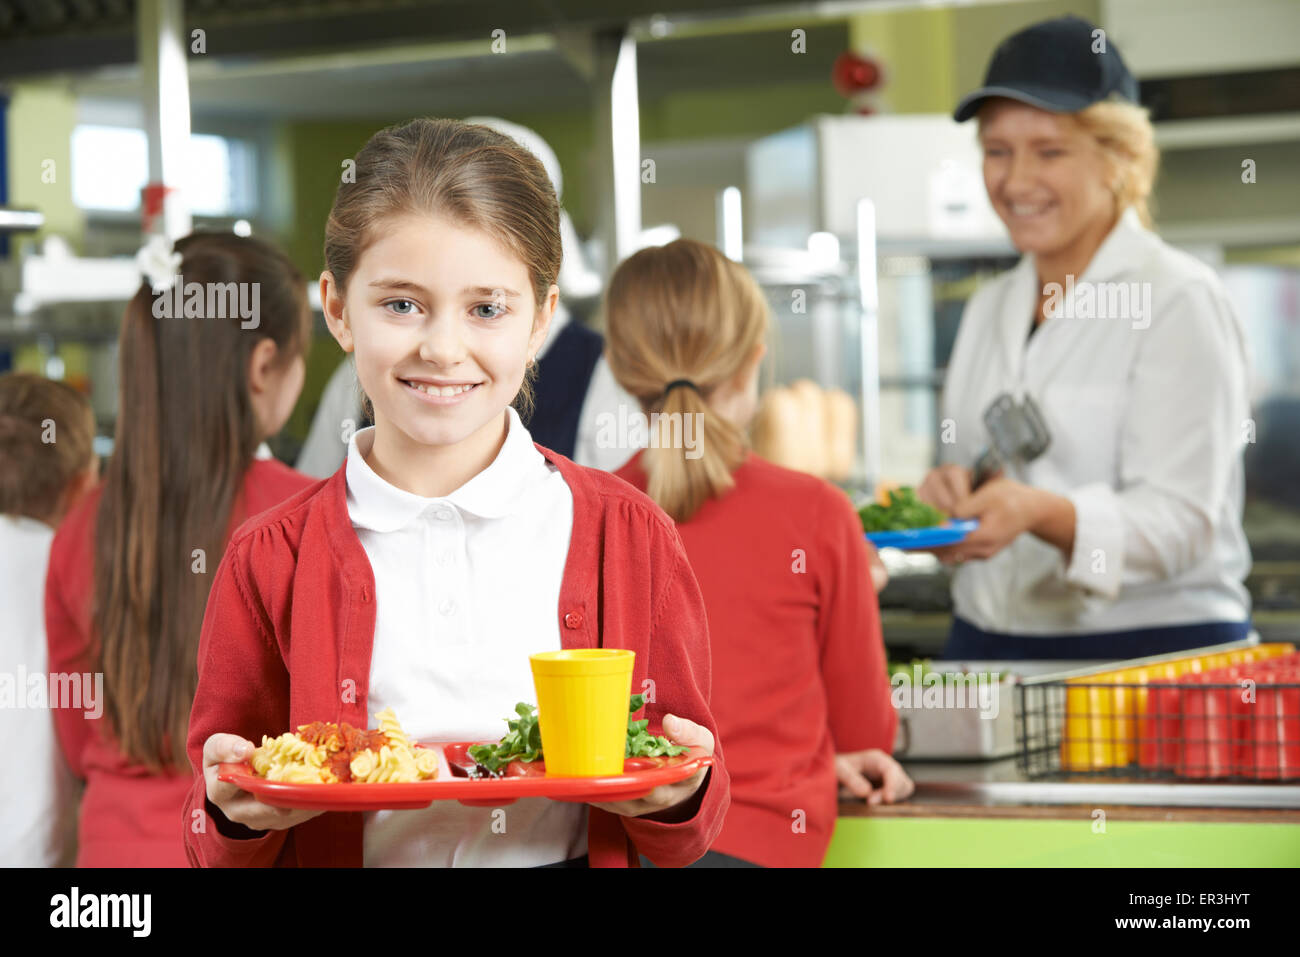 Female Pupil With Healthy Lunch In School Cafeteria Stock Photo